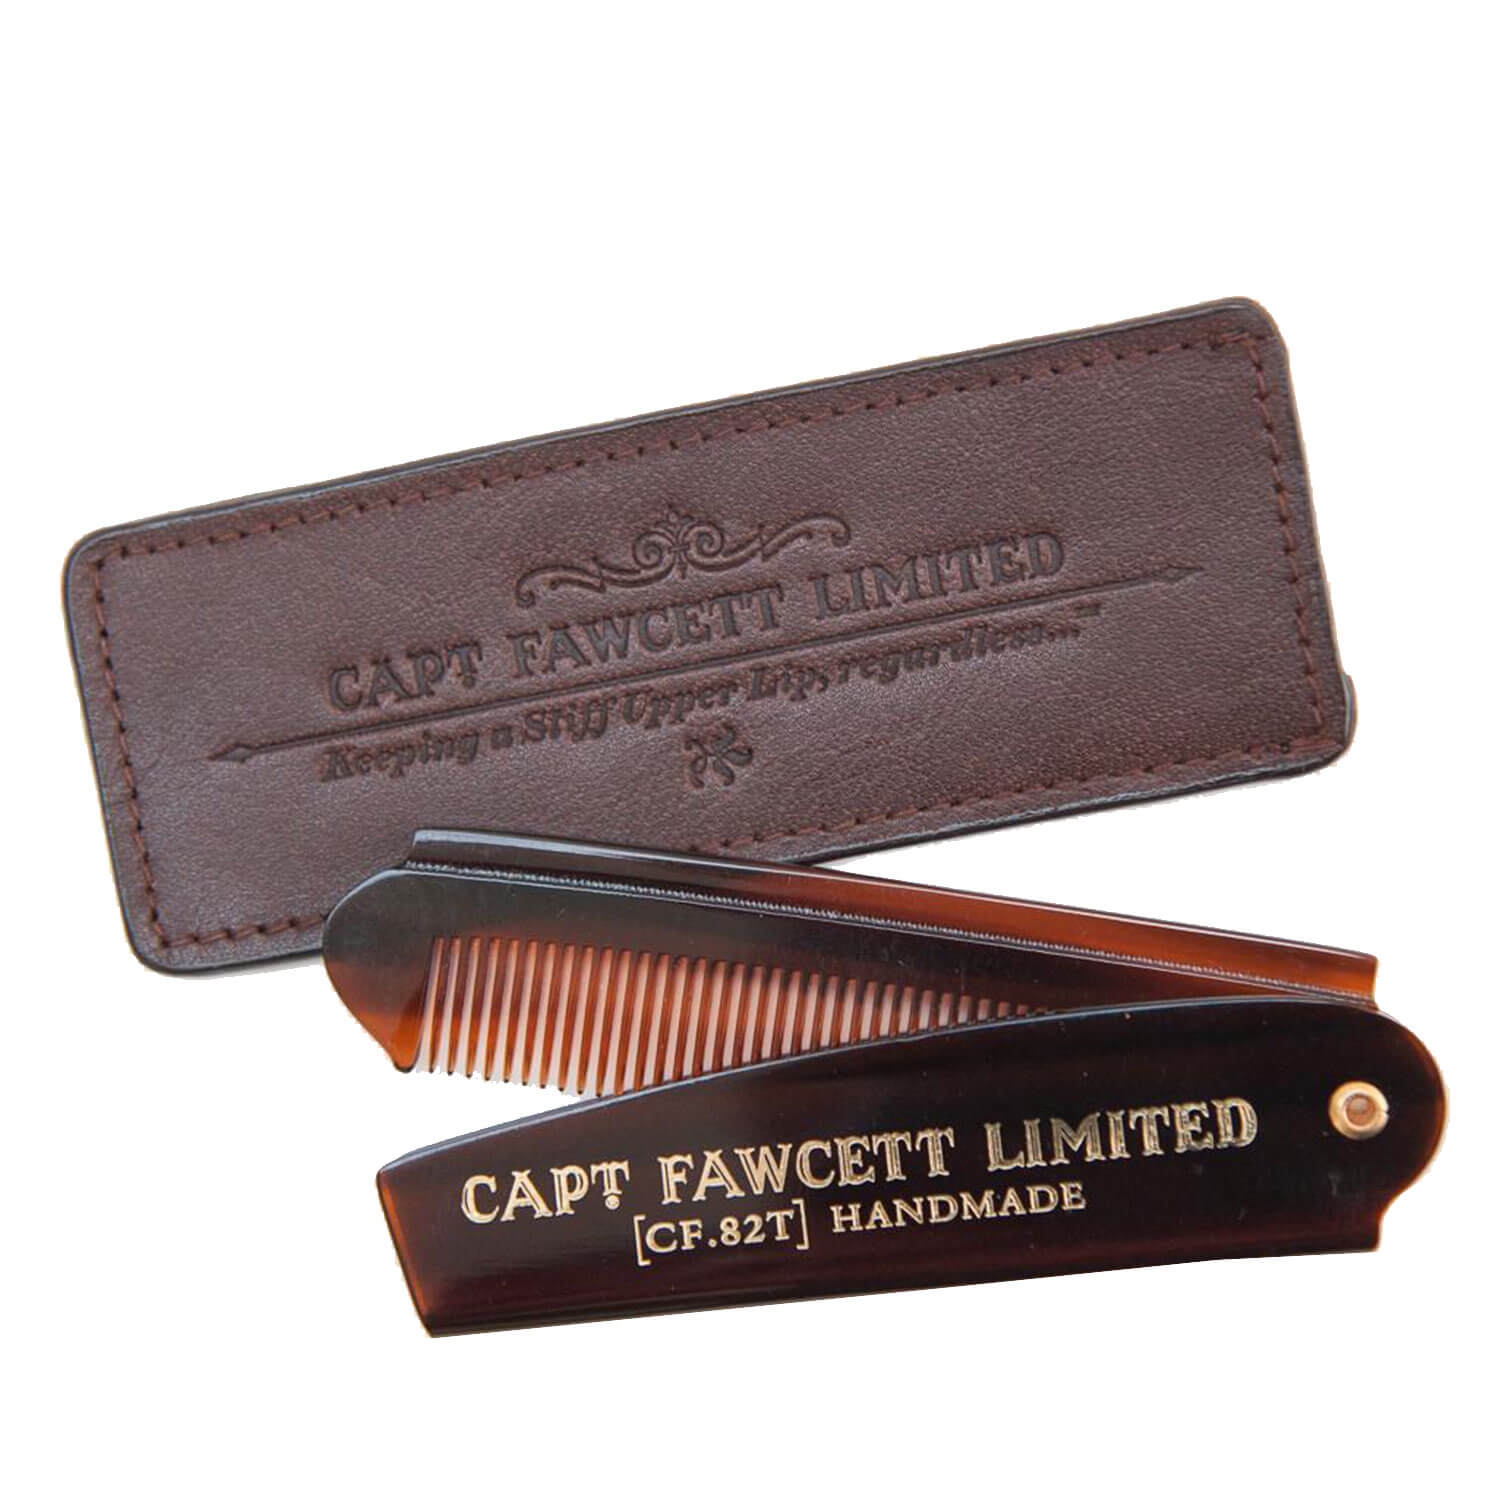 Product image from Capt. Fawcett Tools - Folding Pocket Beard Comb with Leather Case